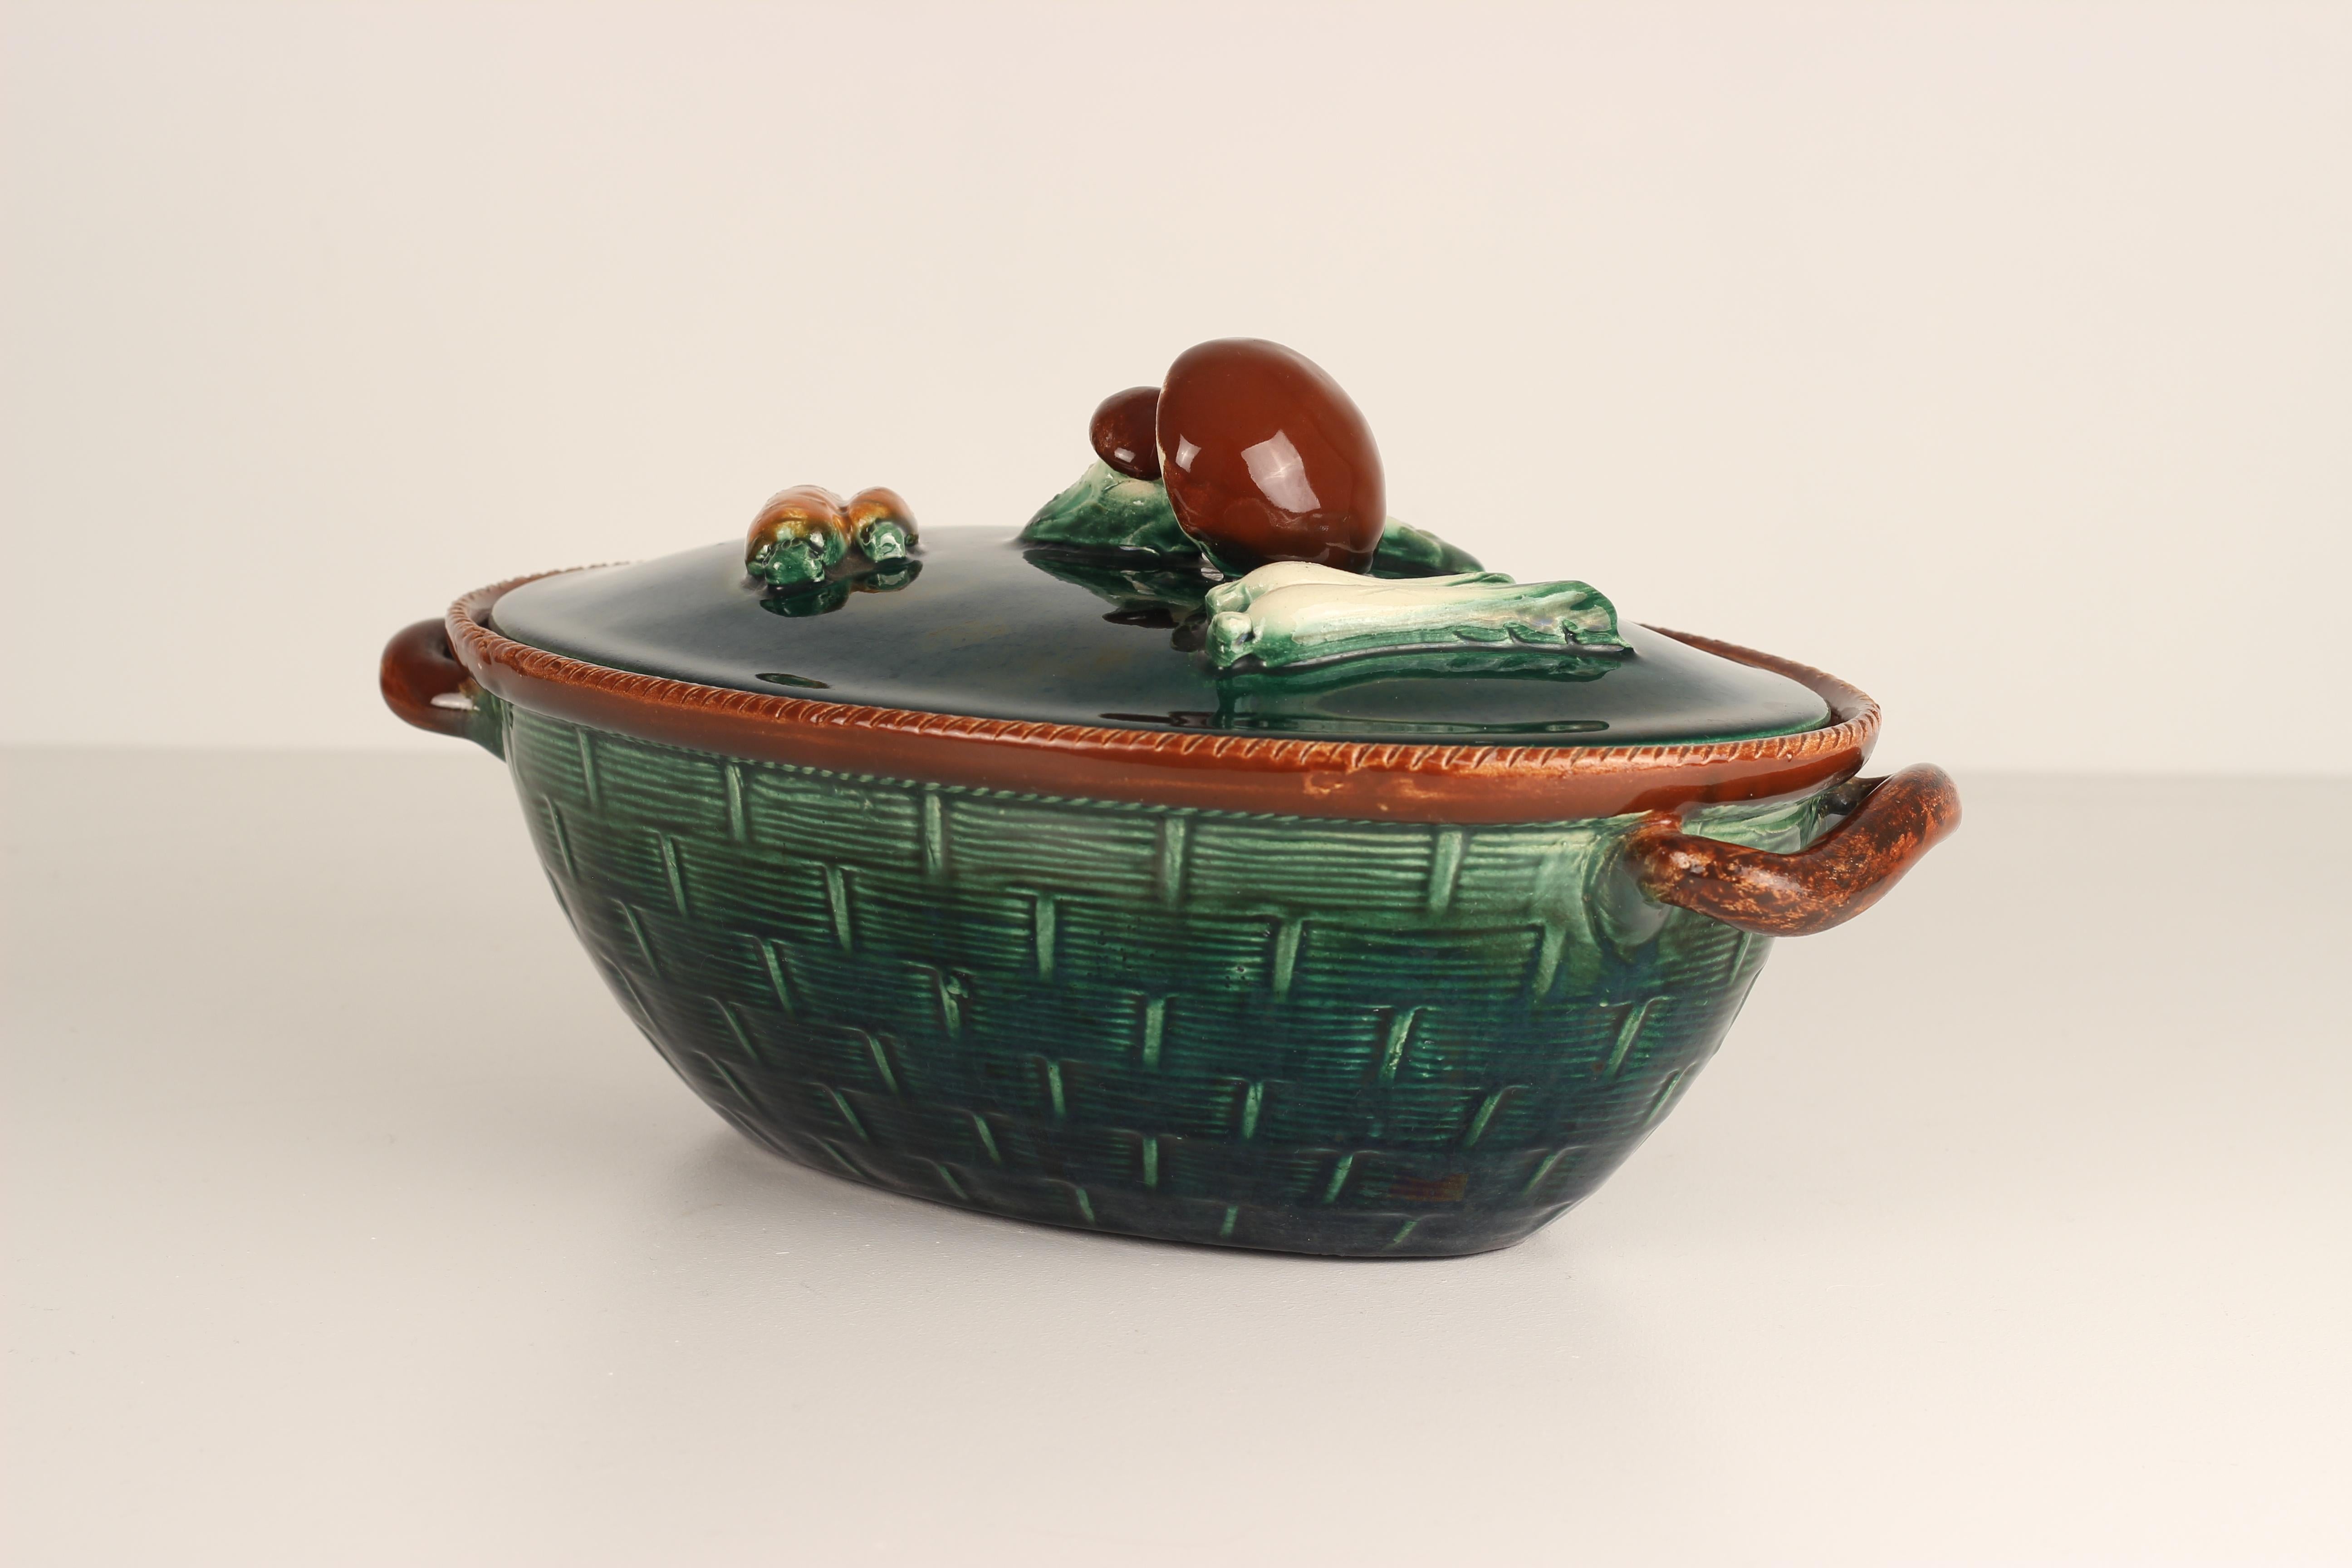 A wonderful Casserole bowl or dish with integral lid, produced in Belgium, circa 1930. A ‘Tellurite’ model number -1125- lidded tureen with basket weave sides in rich, deep earth tones of green around the body with brown basket weave handles. This